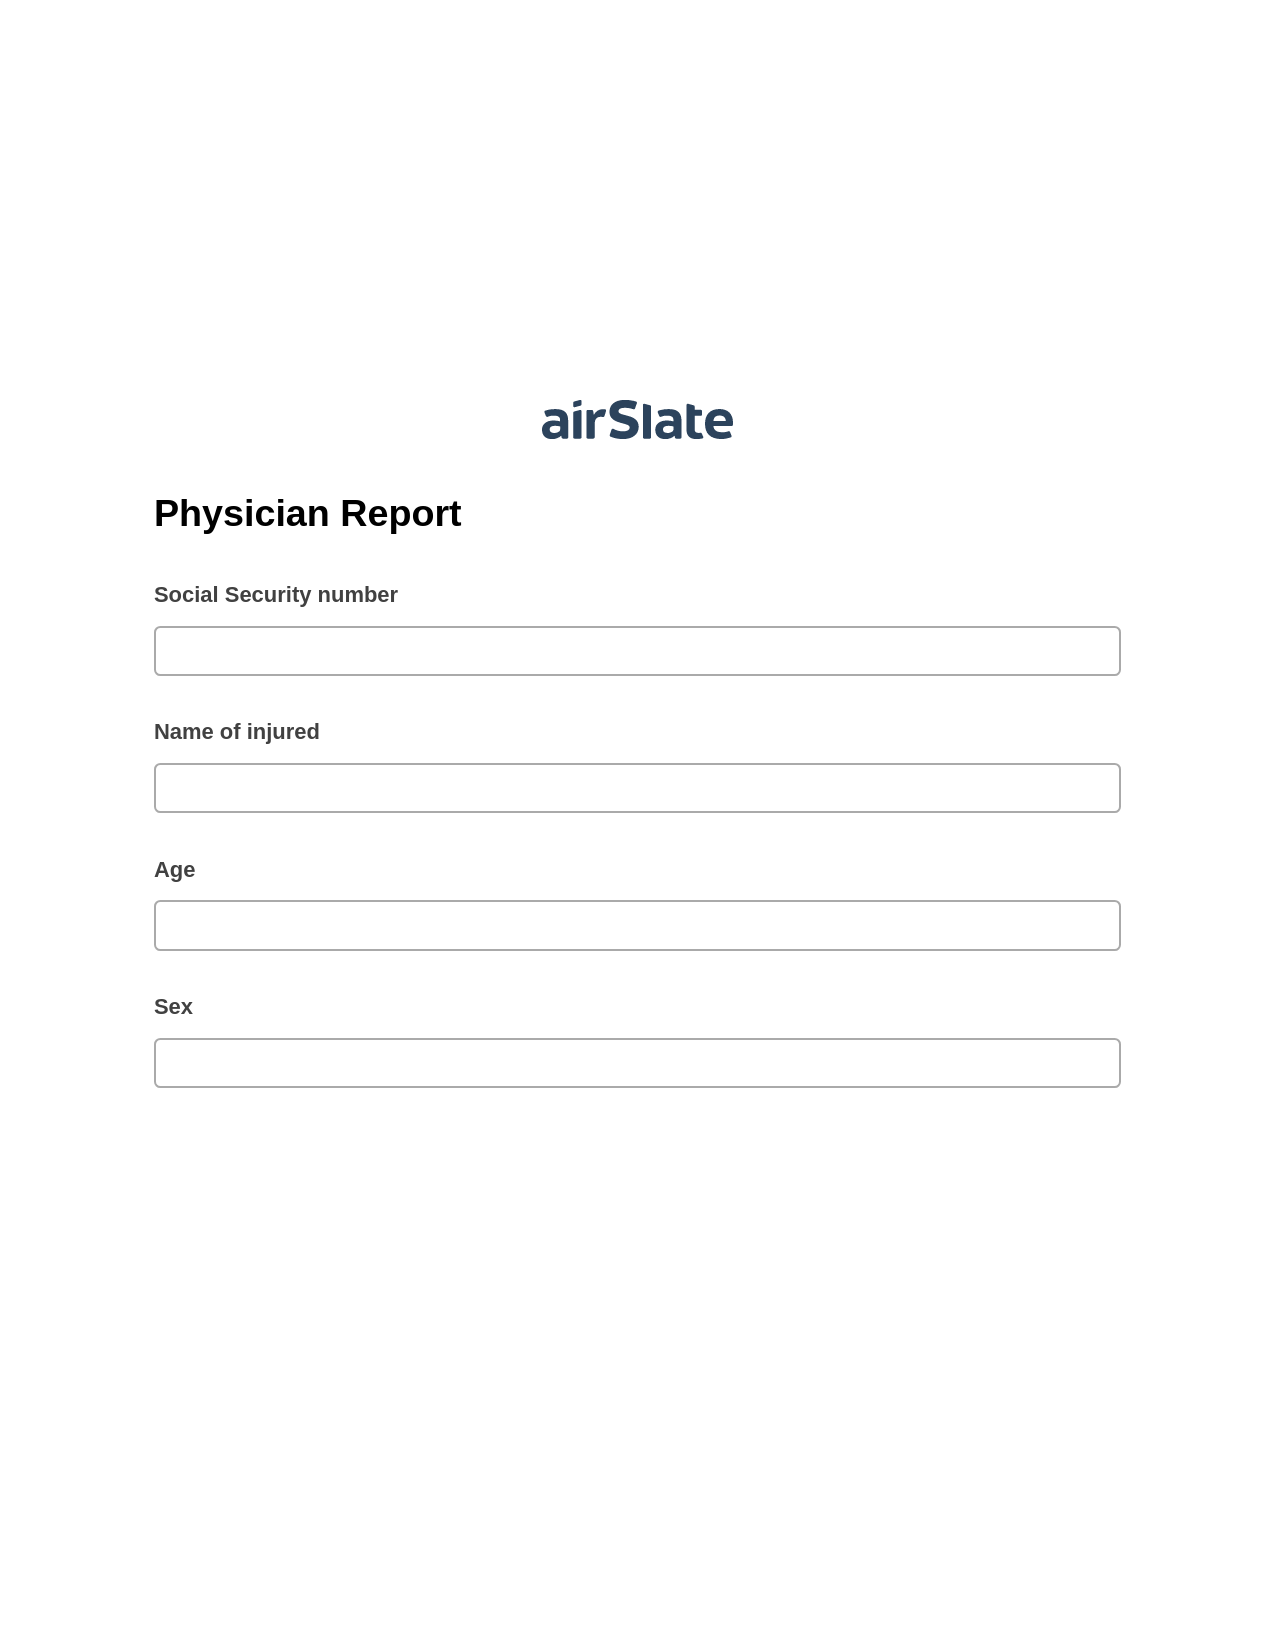 Physician Report Pre-fill from MS Dynamics 365 Records, Email Notification Bot, Archive to Dropbox Bot